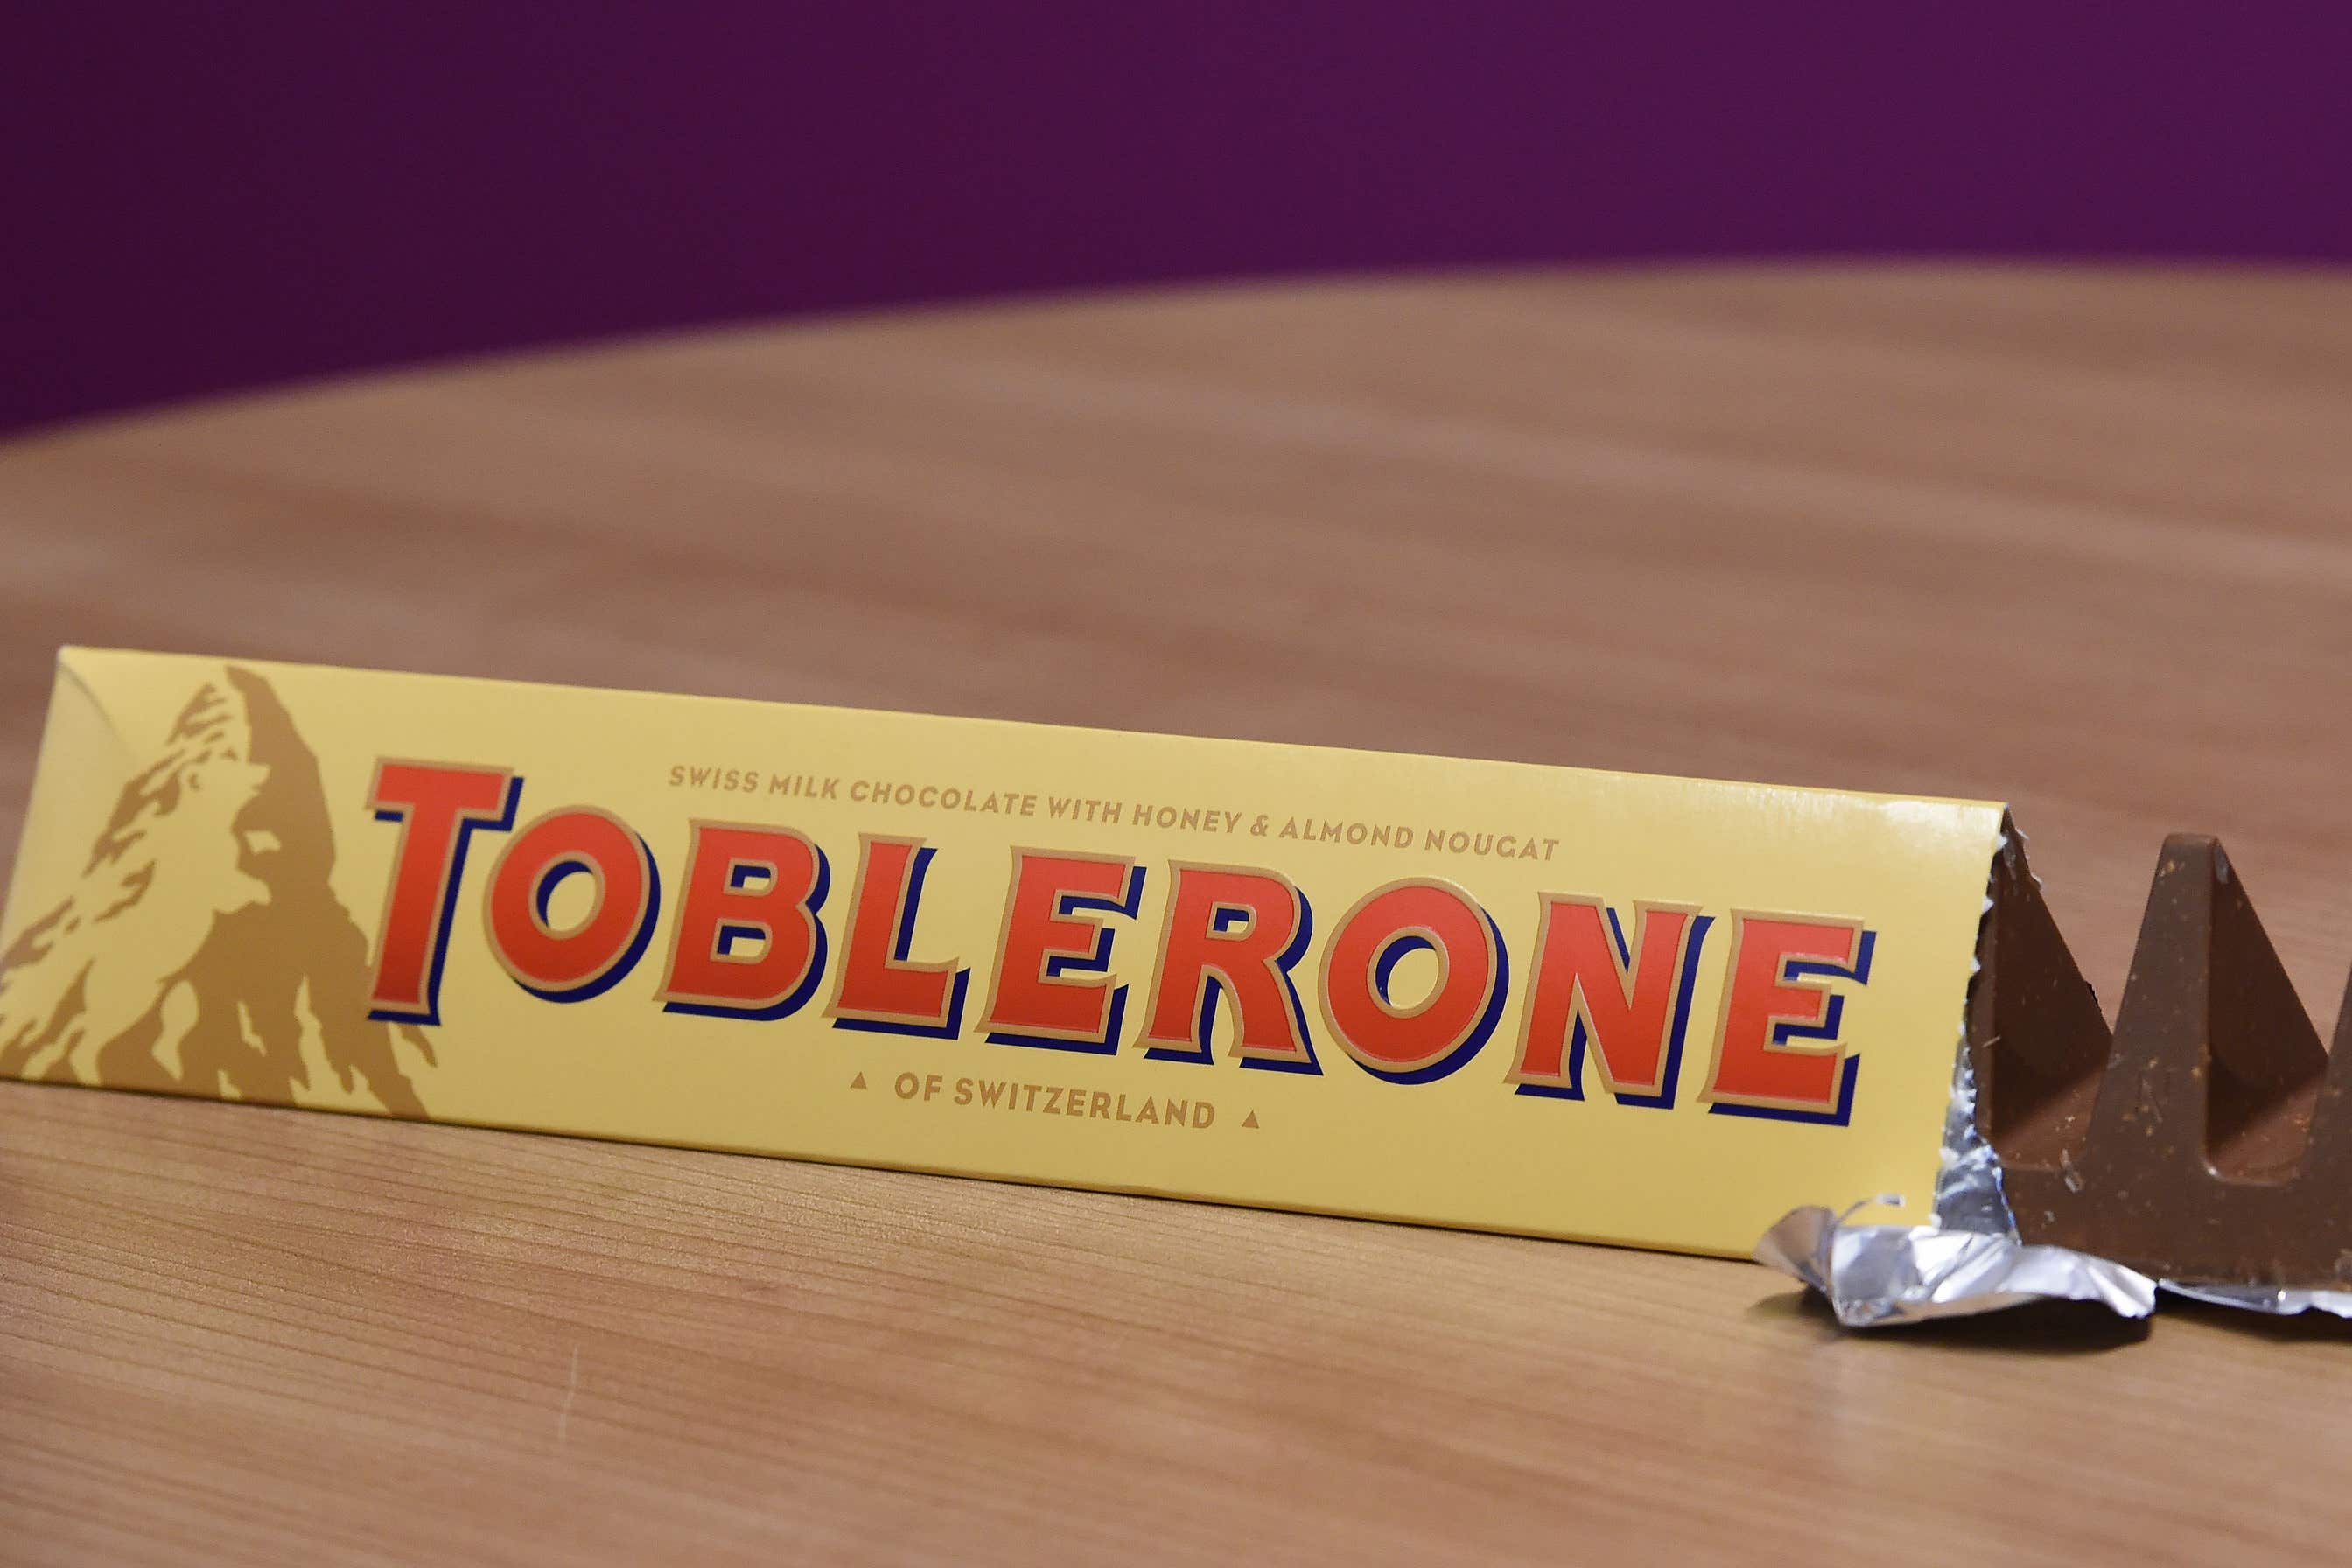 New look: Toblerone to remove Matterhorn from packaging – DW – 03